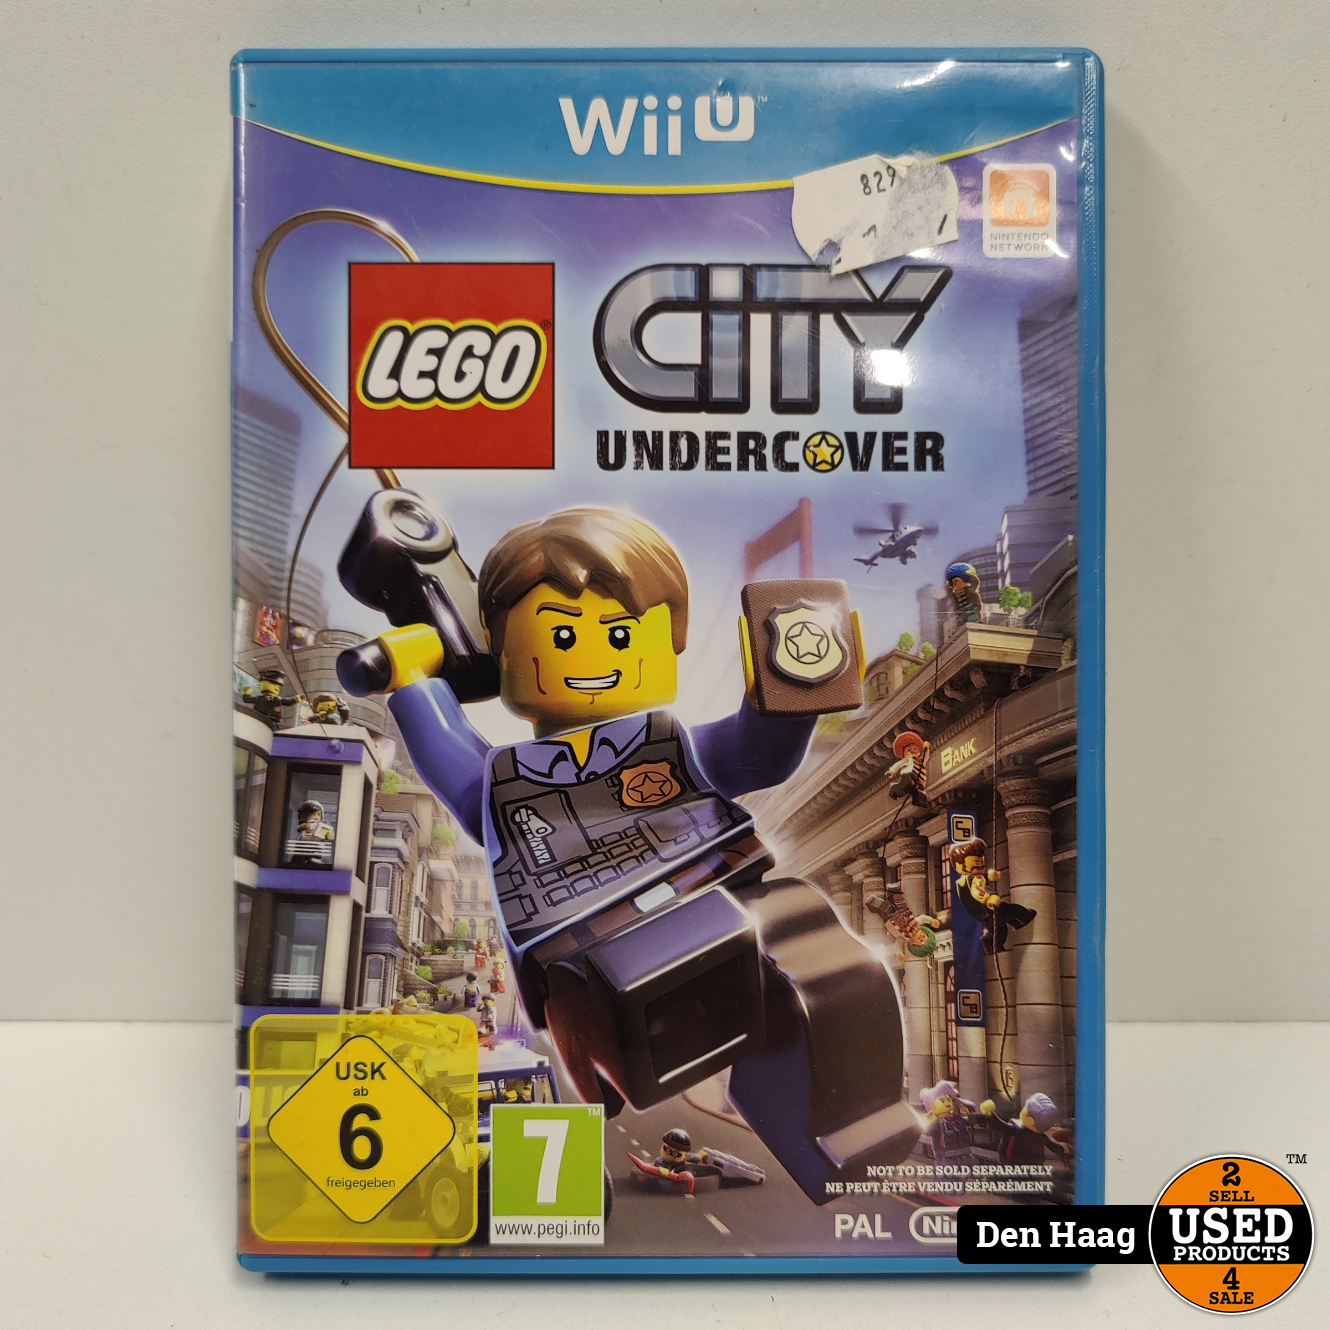 Ambacht George Hanbury welvaart Lego City Undercover - Used Products Den Haag